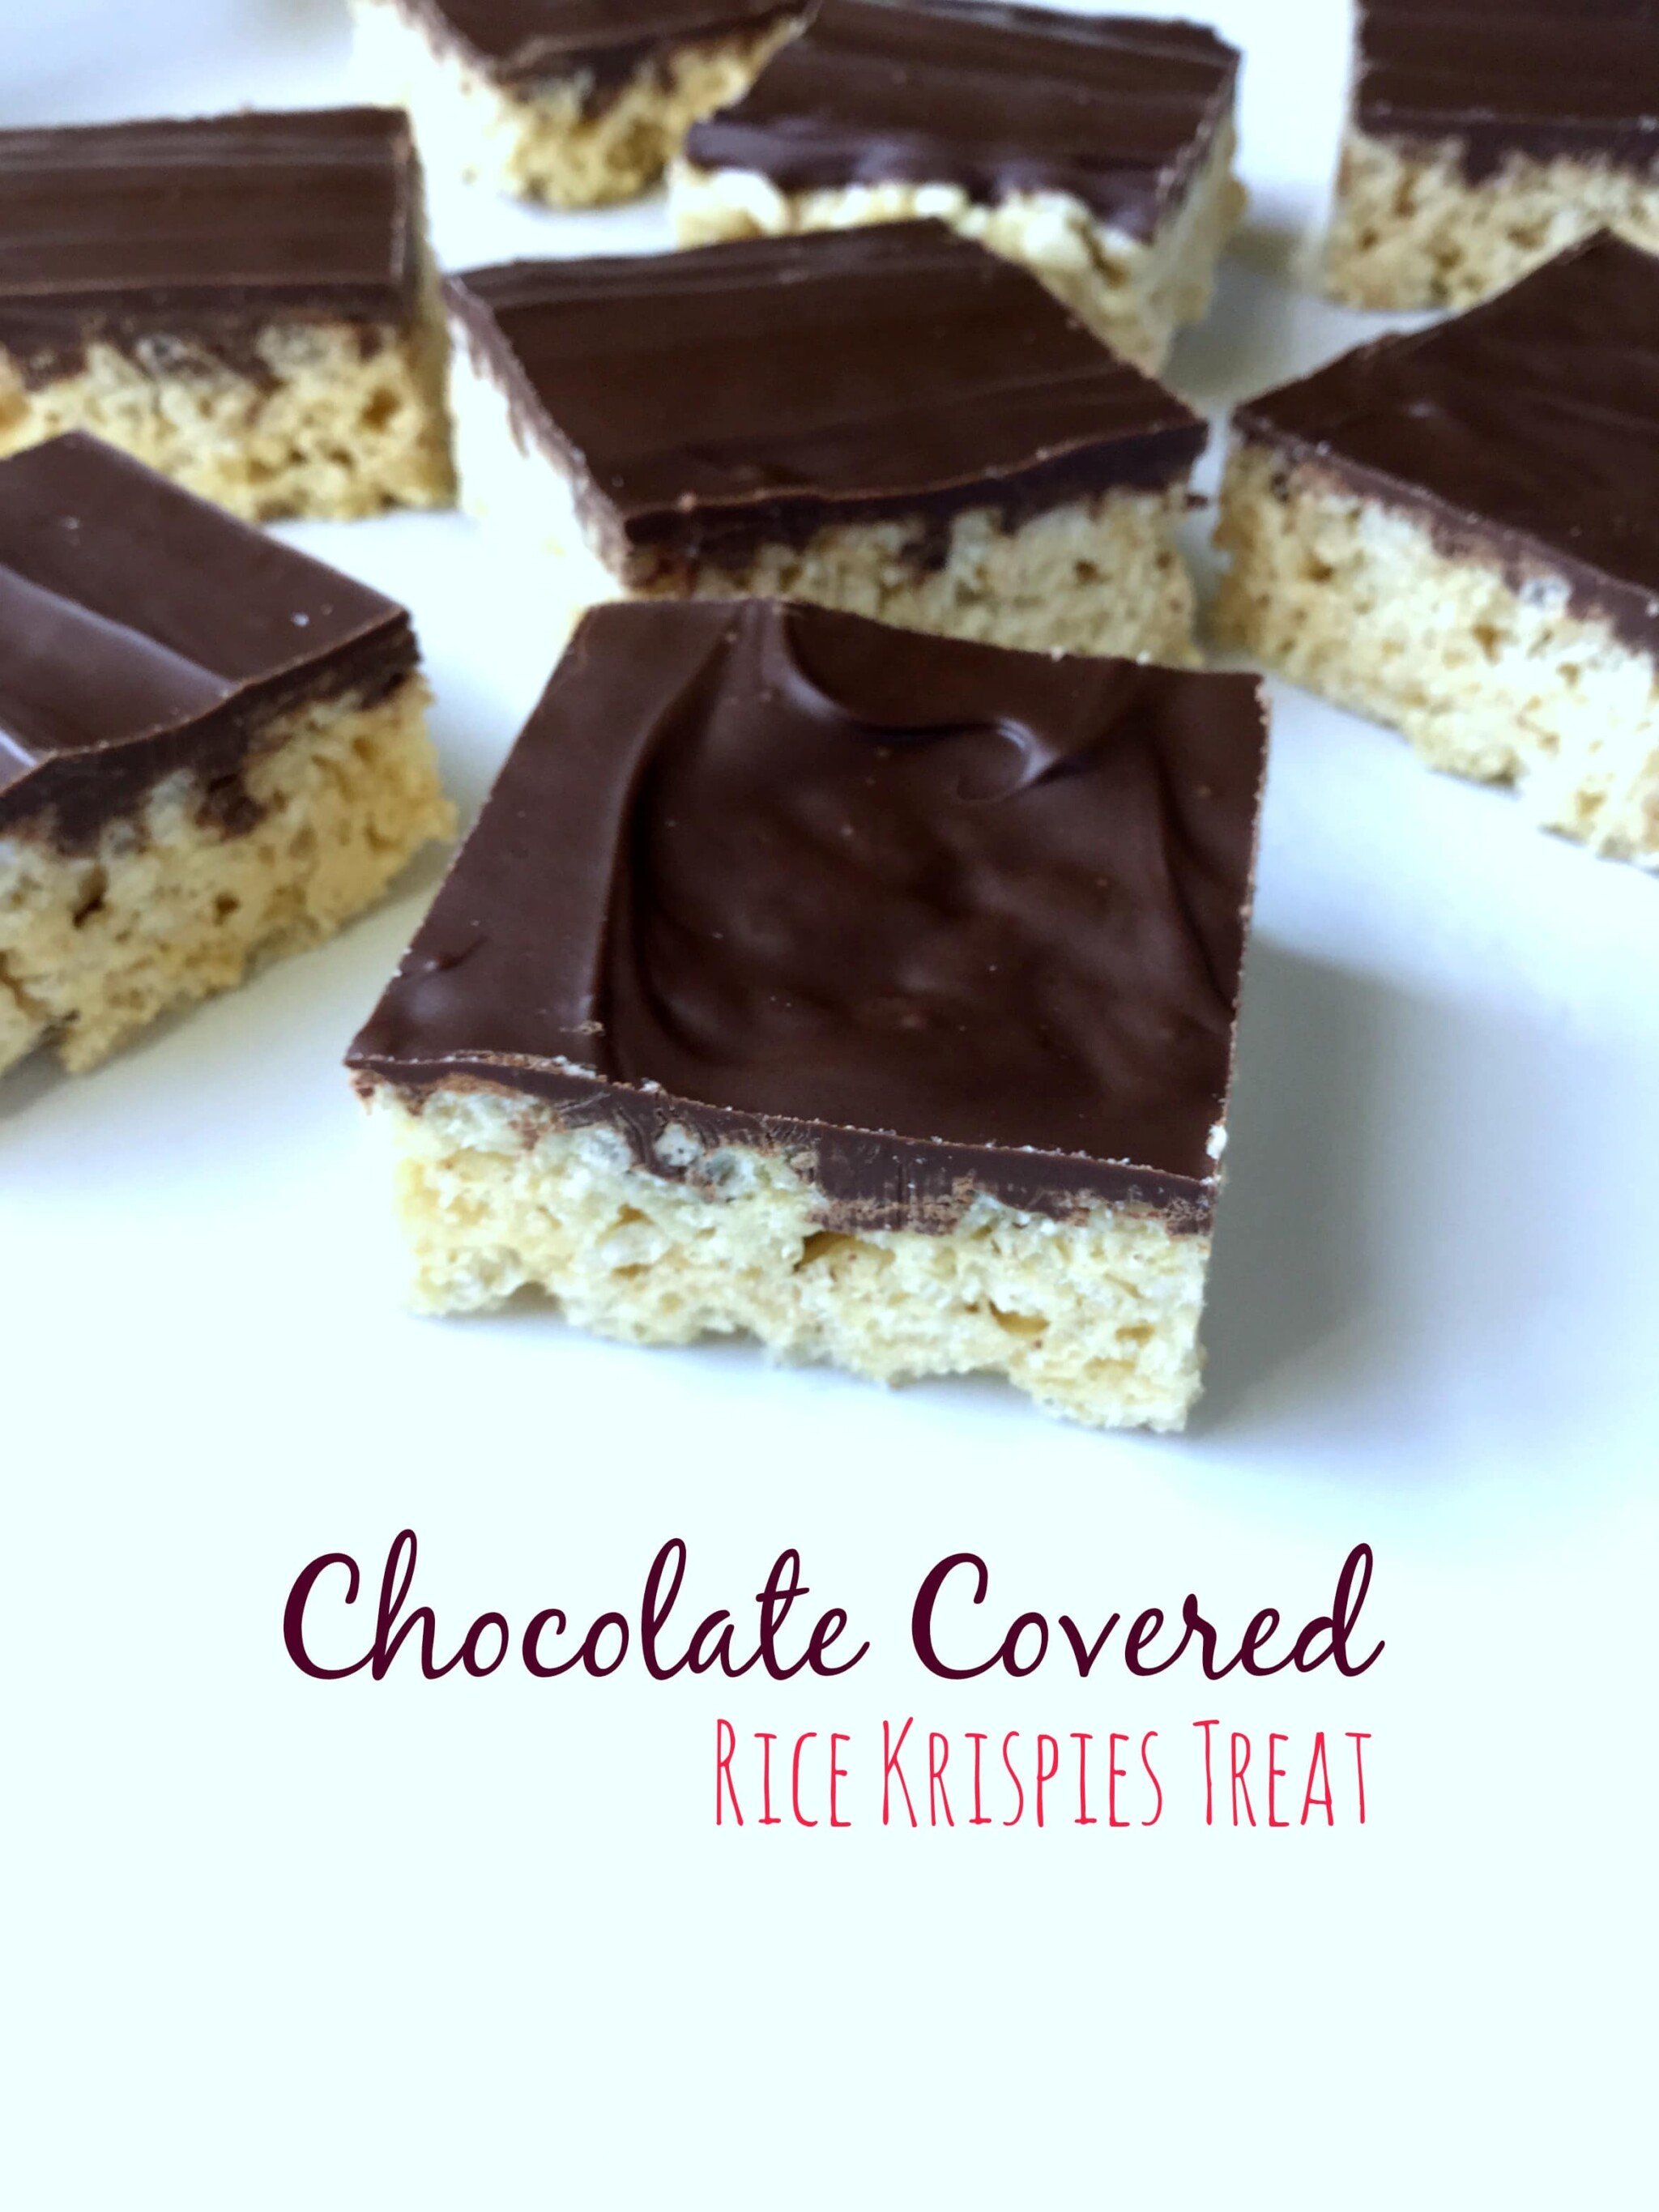 These chocolate covered rice krispies are a great easy treat for everyone!